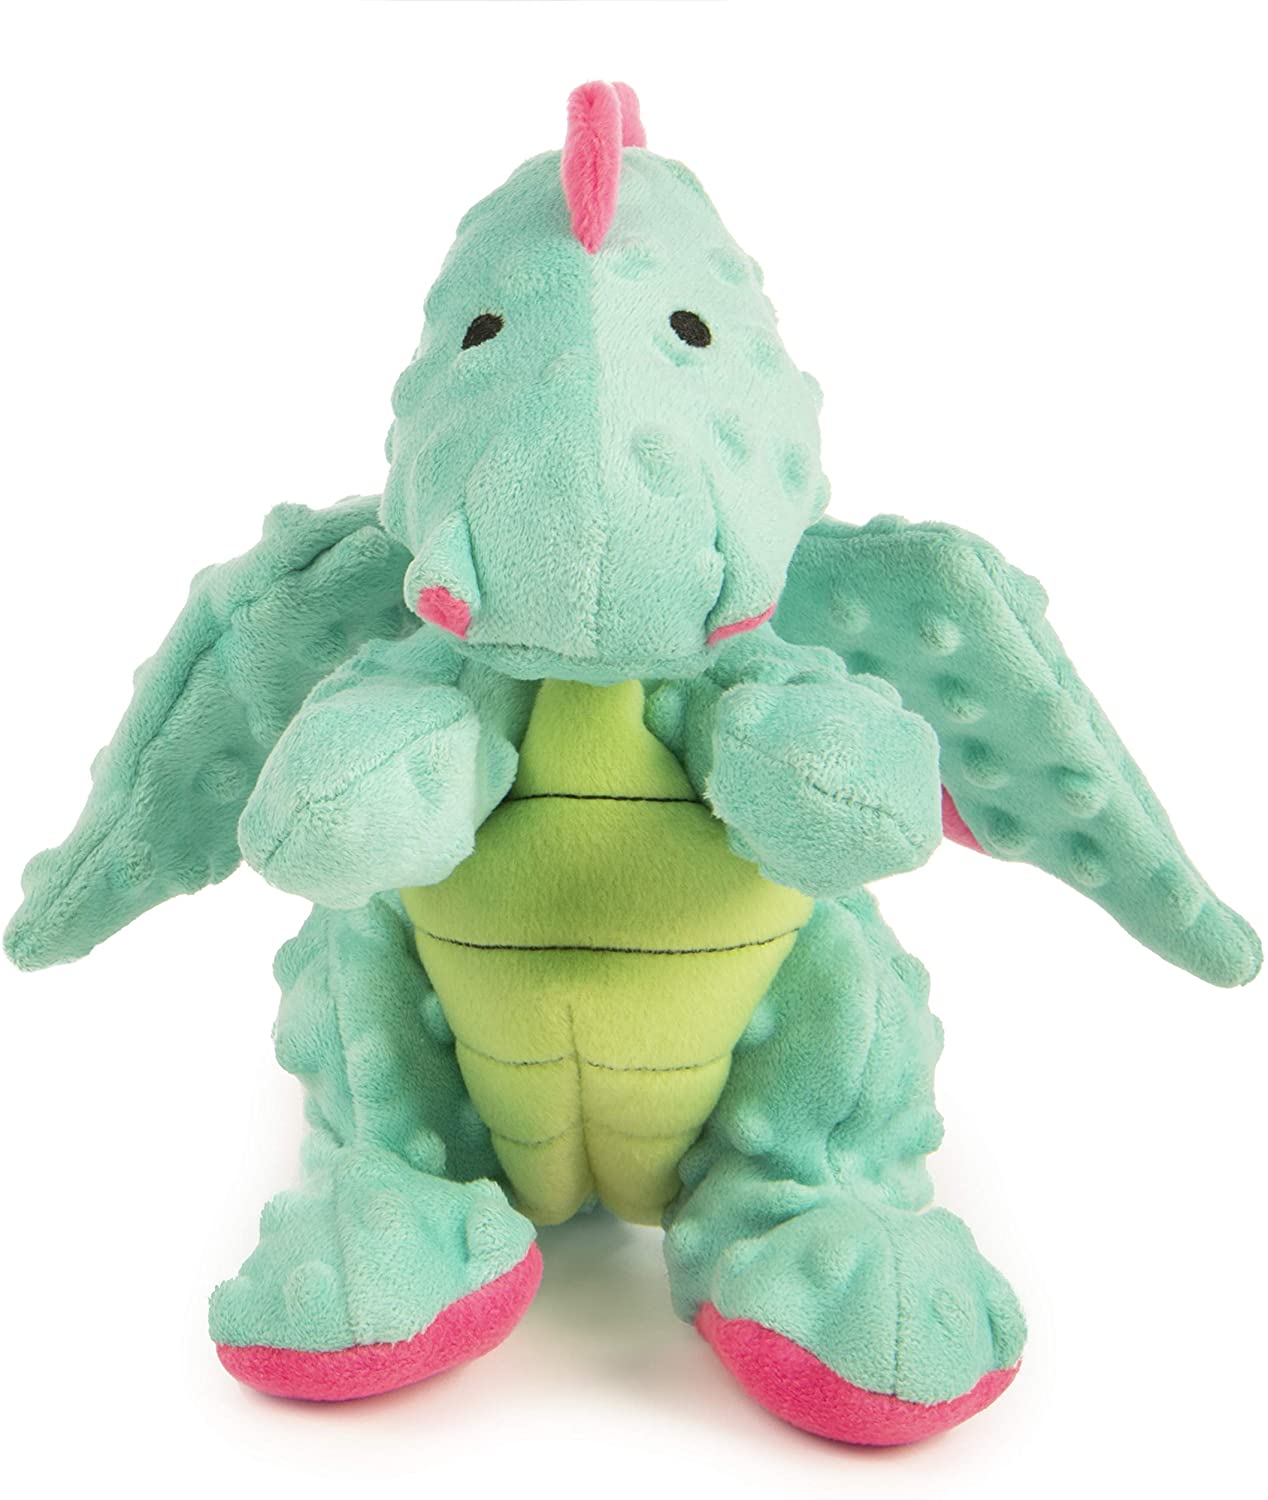 goDog® Dragons™  with Chew Guard Technology™ Durable Plush Squeaker Dog Toy, Seafoam, Large